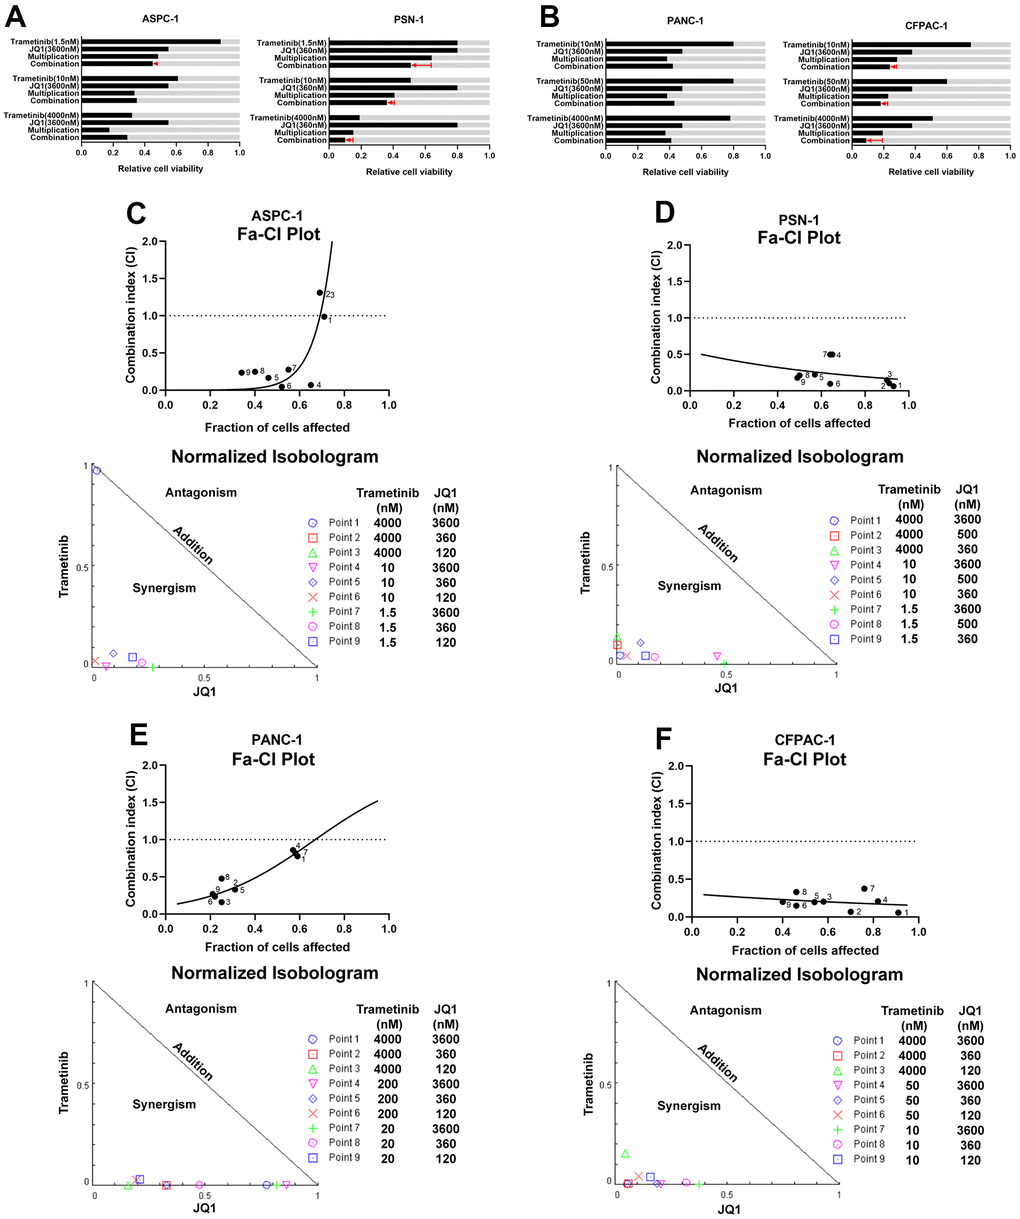 Synergistic effects elicited by combined treatment trametinib and JQ1 in pancreatic cancer. (A) Effect of trametinib and/or JQ1 on the percentage of cells in relative trametinib-sensitive PDAC cell lines (AsPC-1 and PSN-1). Light gray bars show control values. ‘‘Multiplication’’ indicates the expected effect of combined treatment if single-agent effects were multiplied; the red arrow indicates the actual effect of the combination. (B) Effect of trametinib and/or JQ1 on the percentage of cells in relative trametinib-resistant PDAC cell lines (PANC-1 and CFPAC-1). (C–F) Combination index (CI) (top) and isobologram (bottom) analyses reveal the synergistic effect of trametinib and JQ1 not only in trametinib-sensitive PDAC cell lines (AsPC-1 and PSN-1), but also in trametinib-resistant PDAC cell lines (PANC-1 and CFPAC-1). Fraction affected (Fa)-CI plots (top) and normalized isobolograms (bottom) are shown.